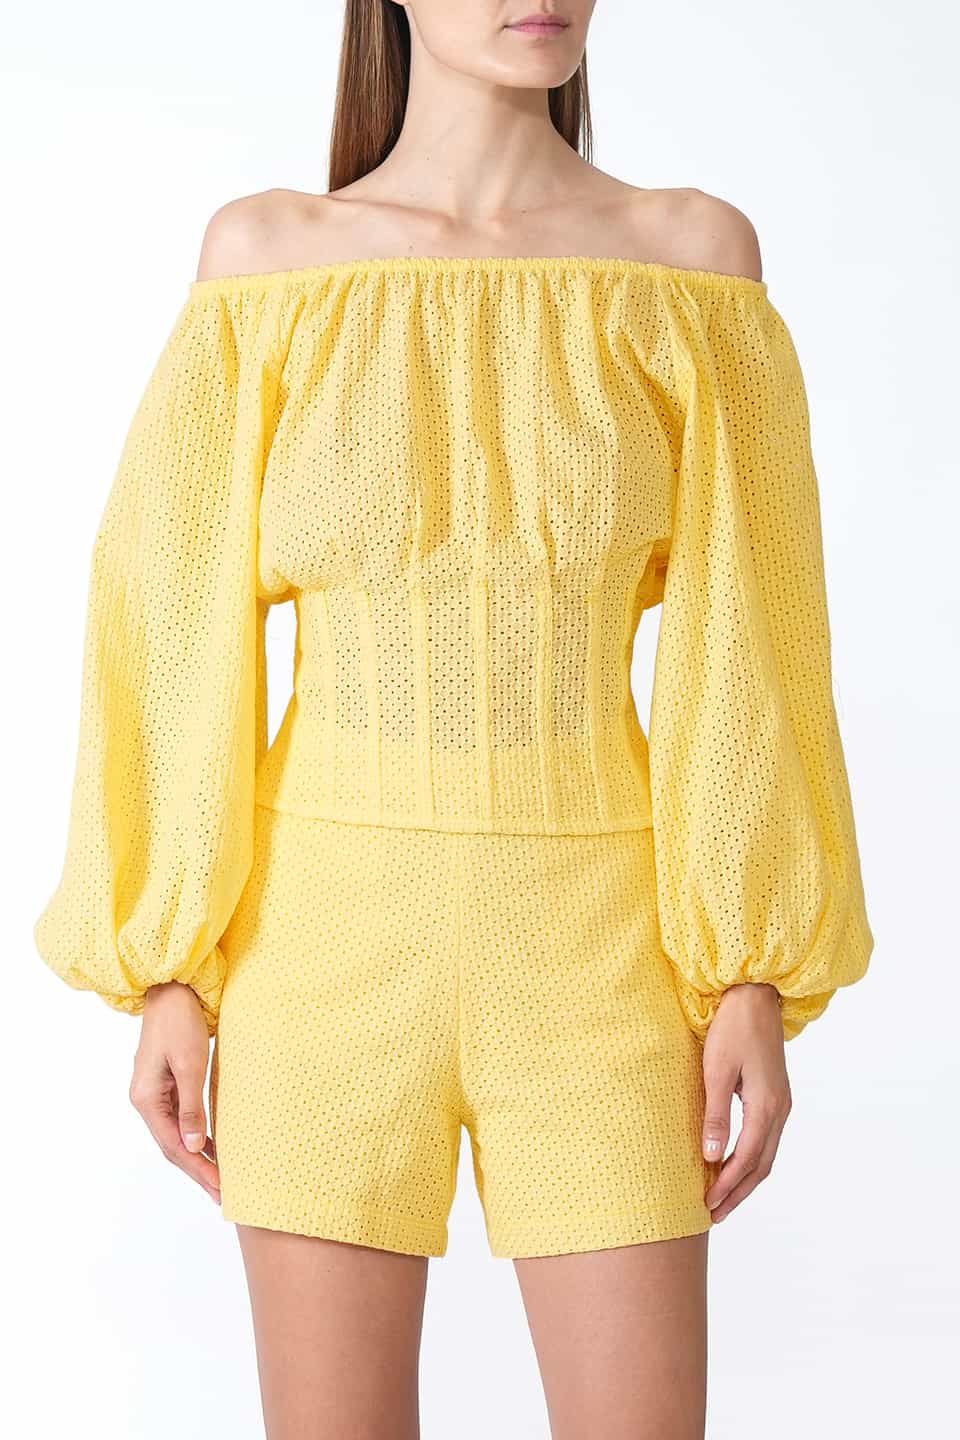 Shop online trendy Yellow Women blouses from Federica Tosi Fashion designer. Product gallery 1